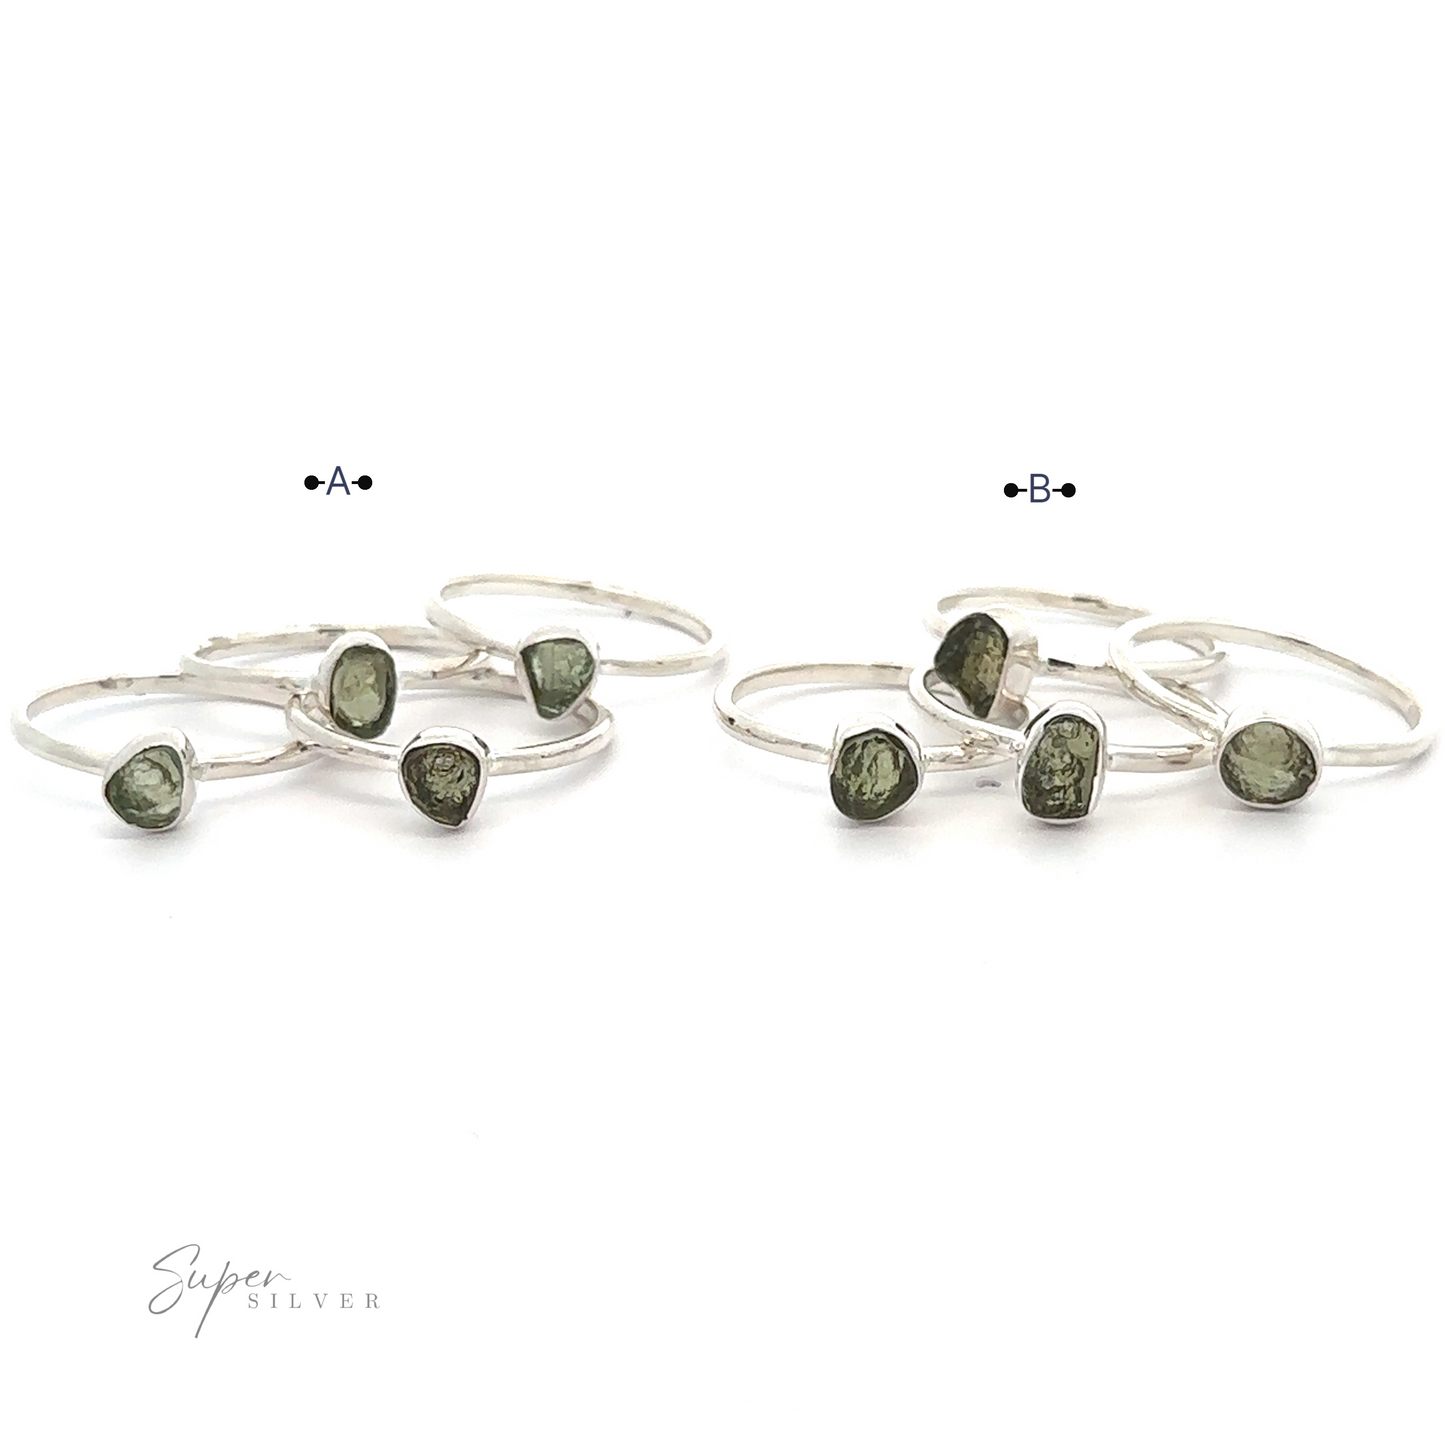 
                  
                    A set of sterling silver rings with Raw Moldavite gemstones, labeled A and B, displayed on a white background.
                  
                